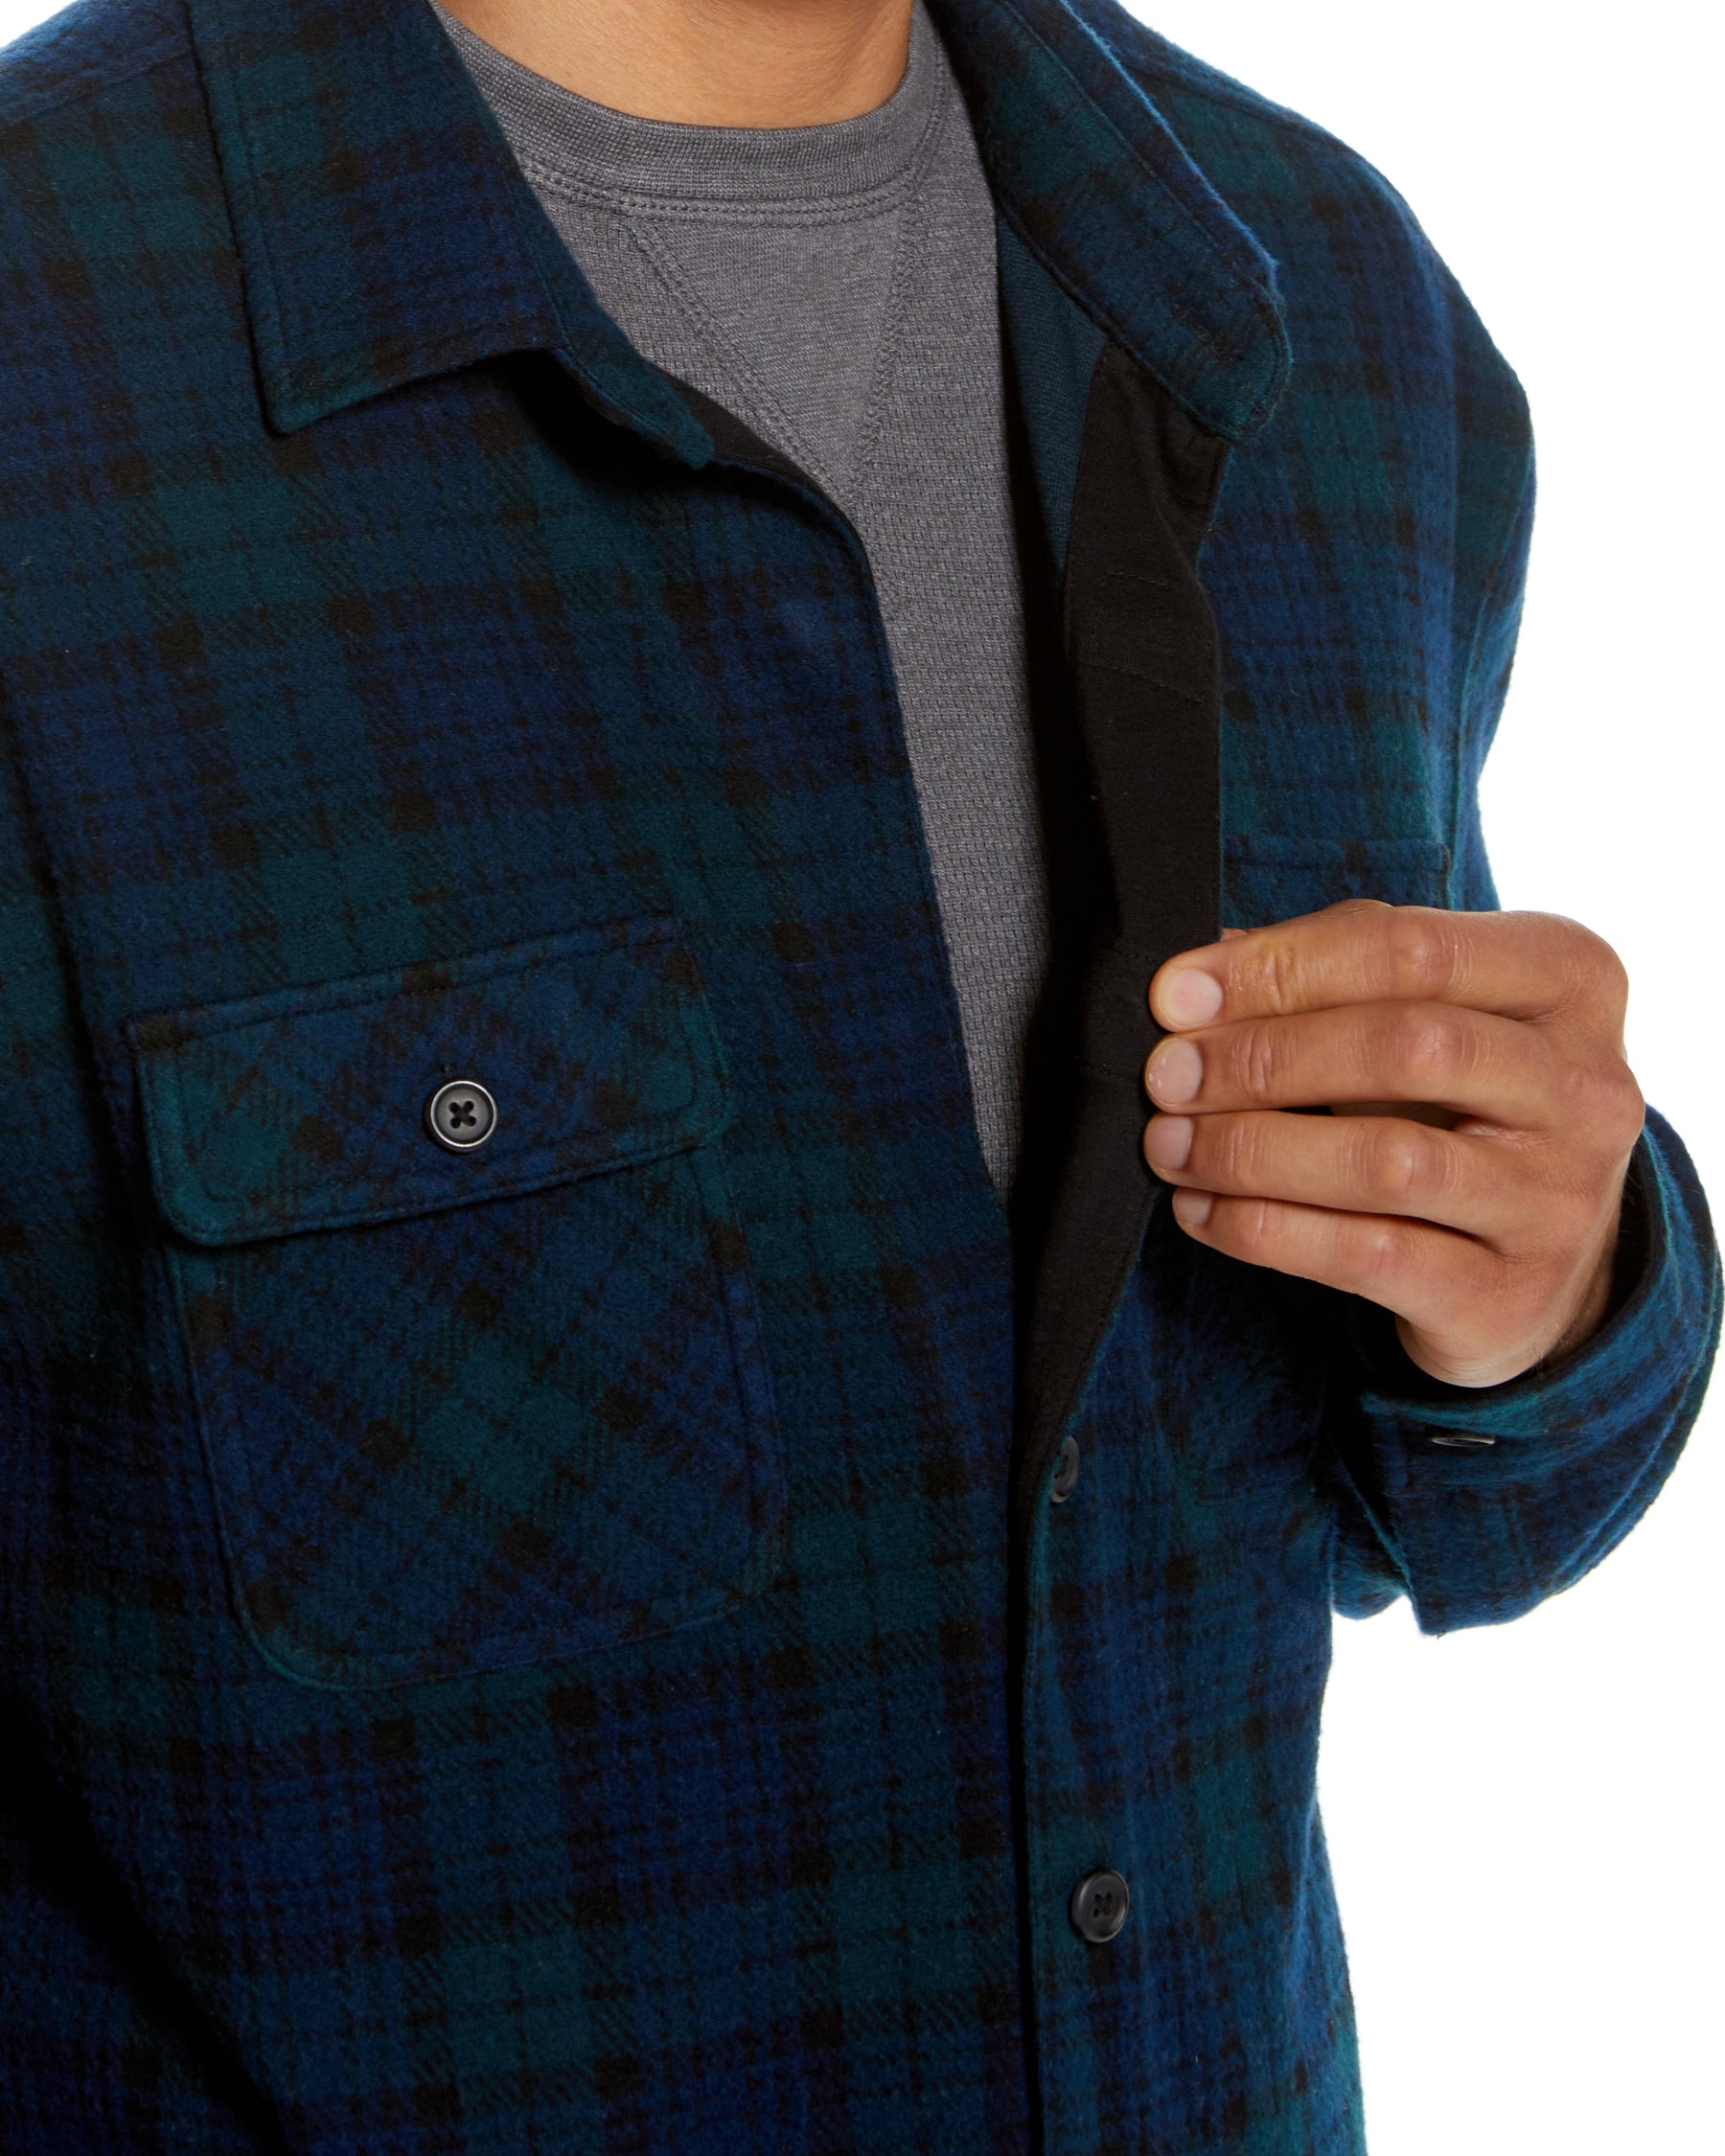 Long Sleeve Navy Black Watch Plaid  Flannel Shirt Combo Layering Piece with Magnetic Closures